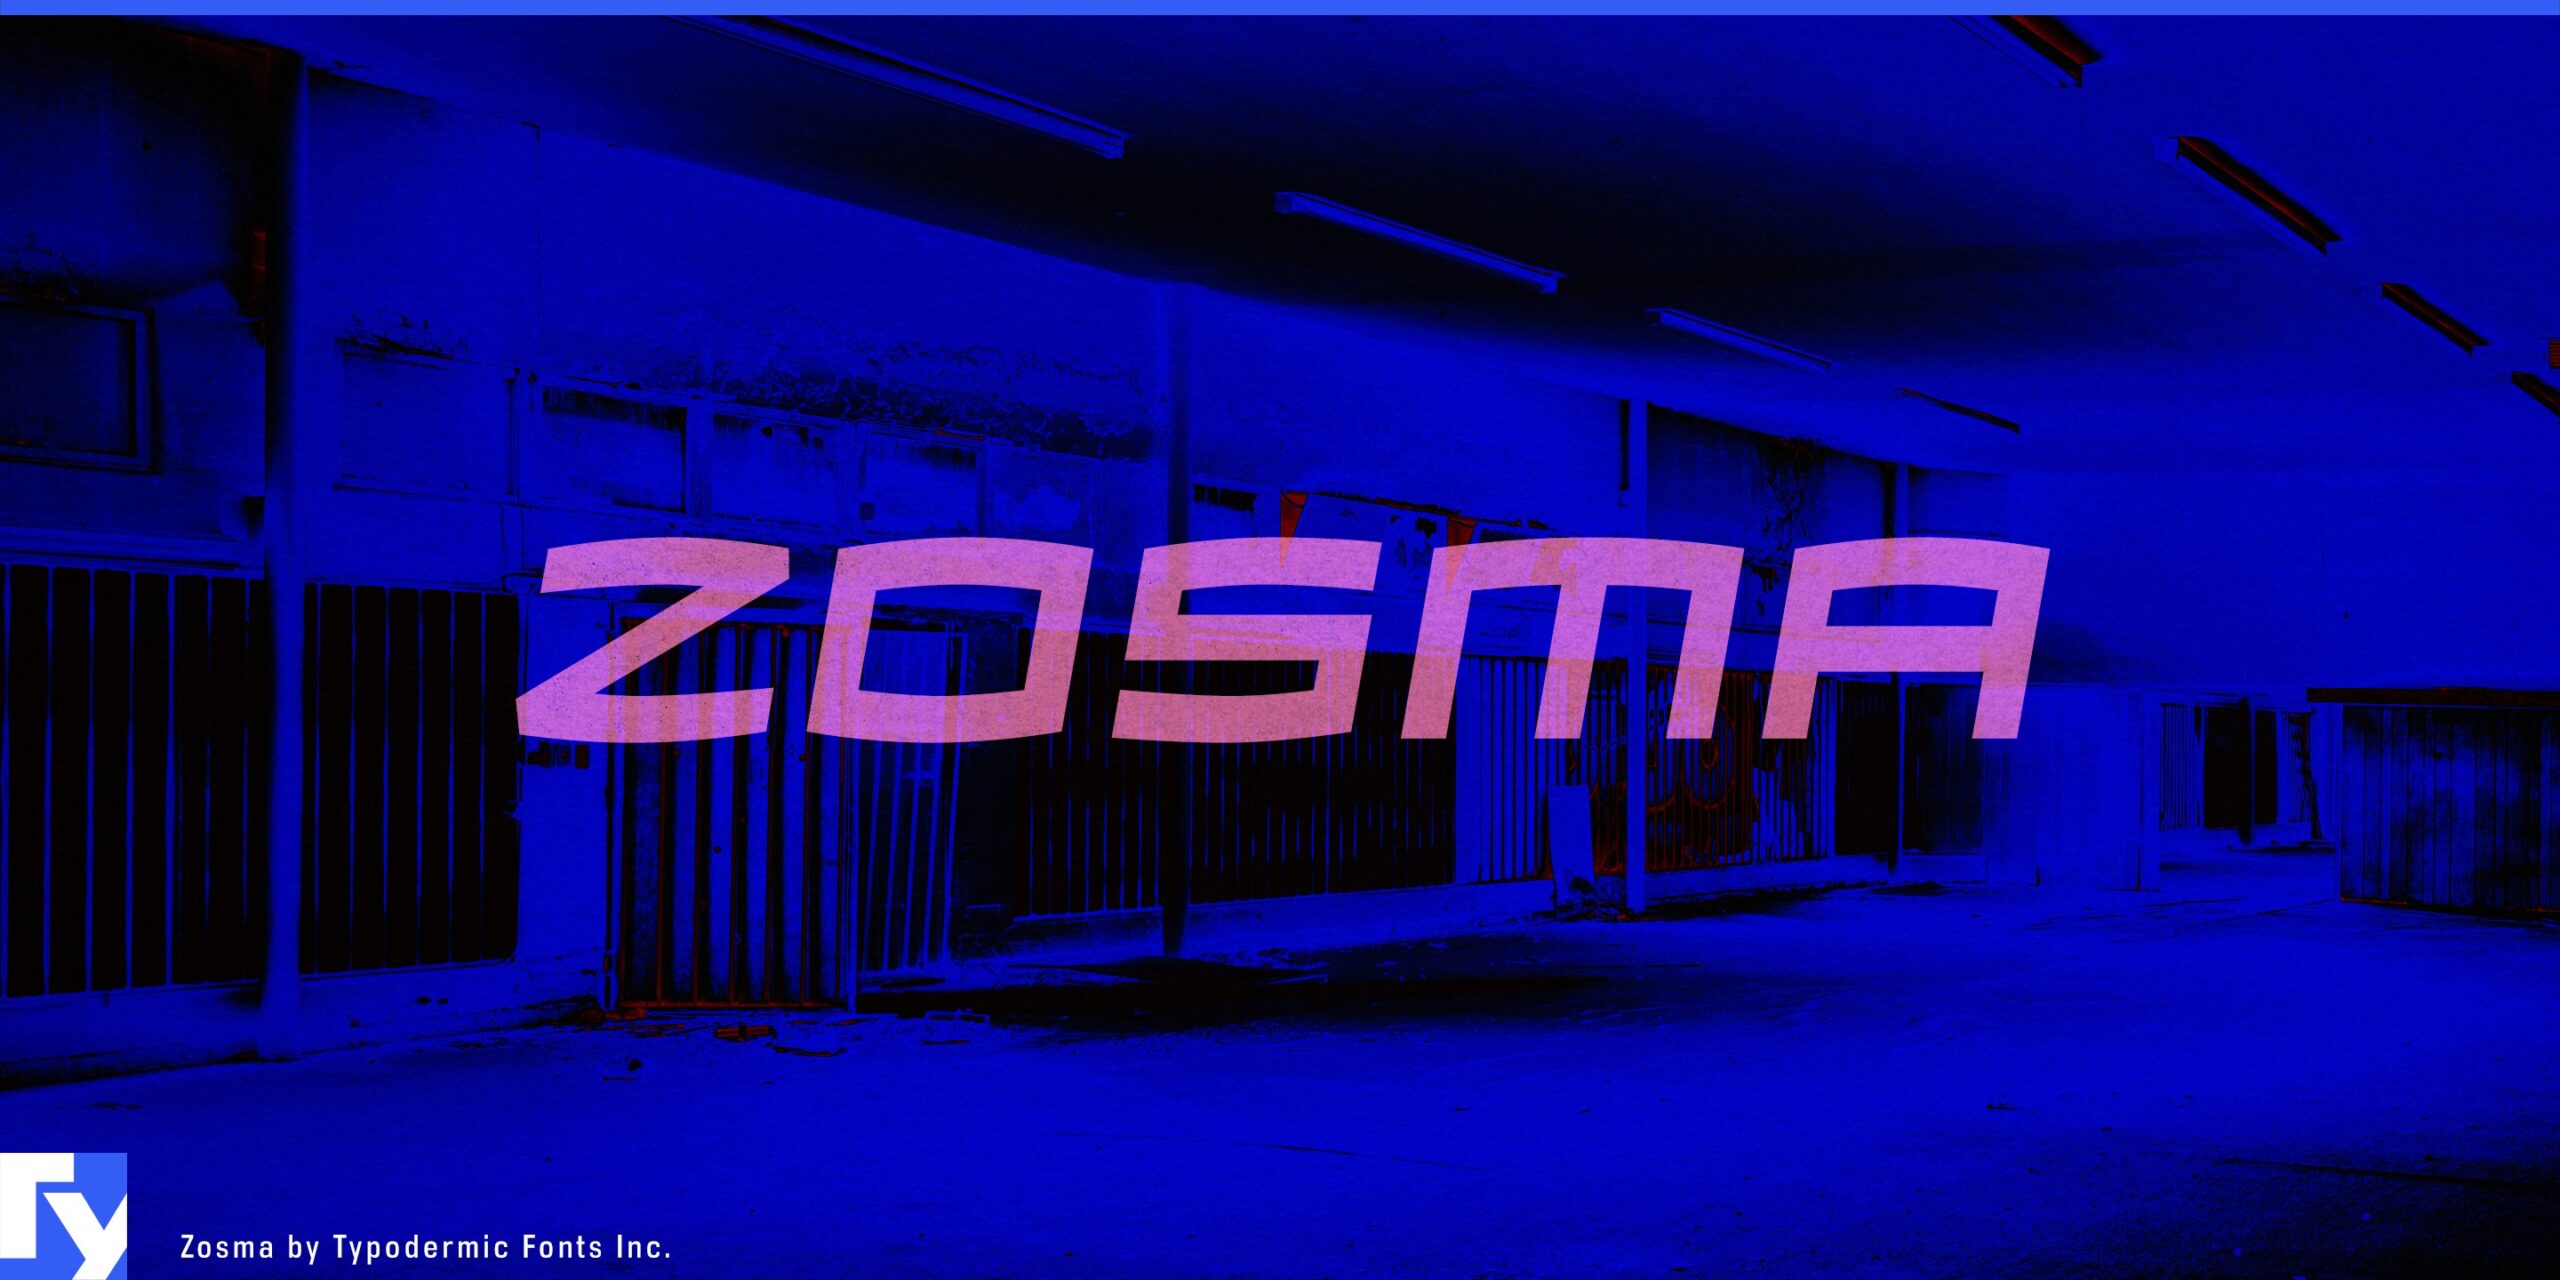 Techno Letterforms Redefined: Zosma Typeface Stands Out